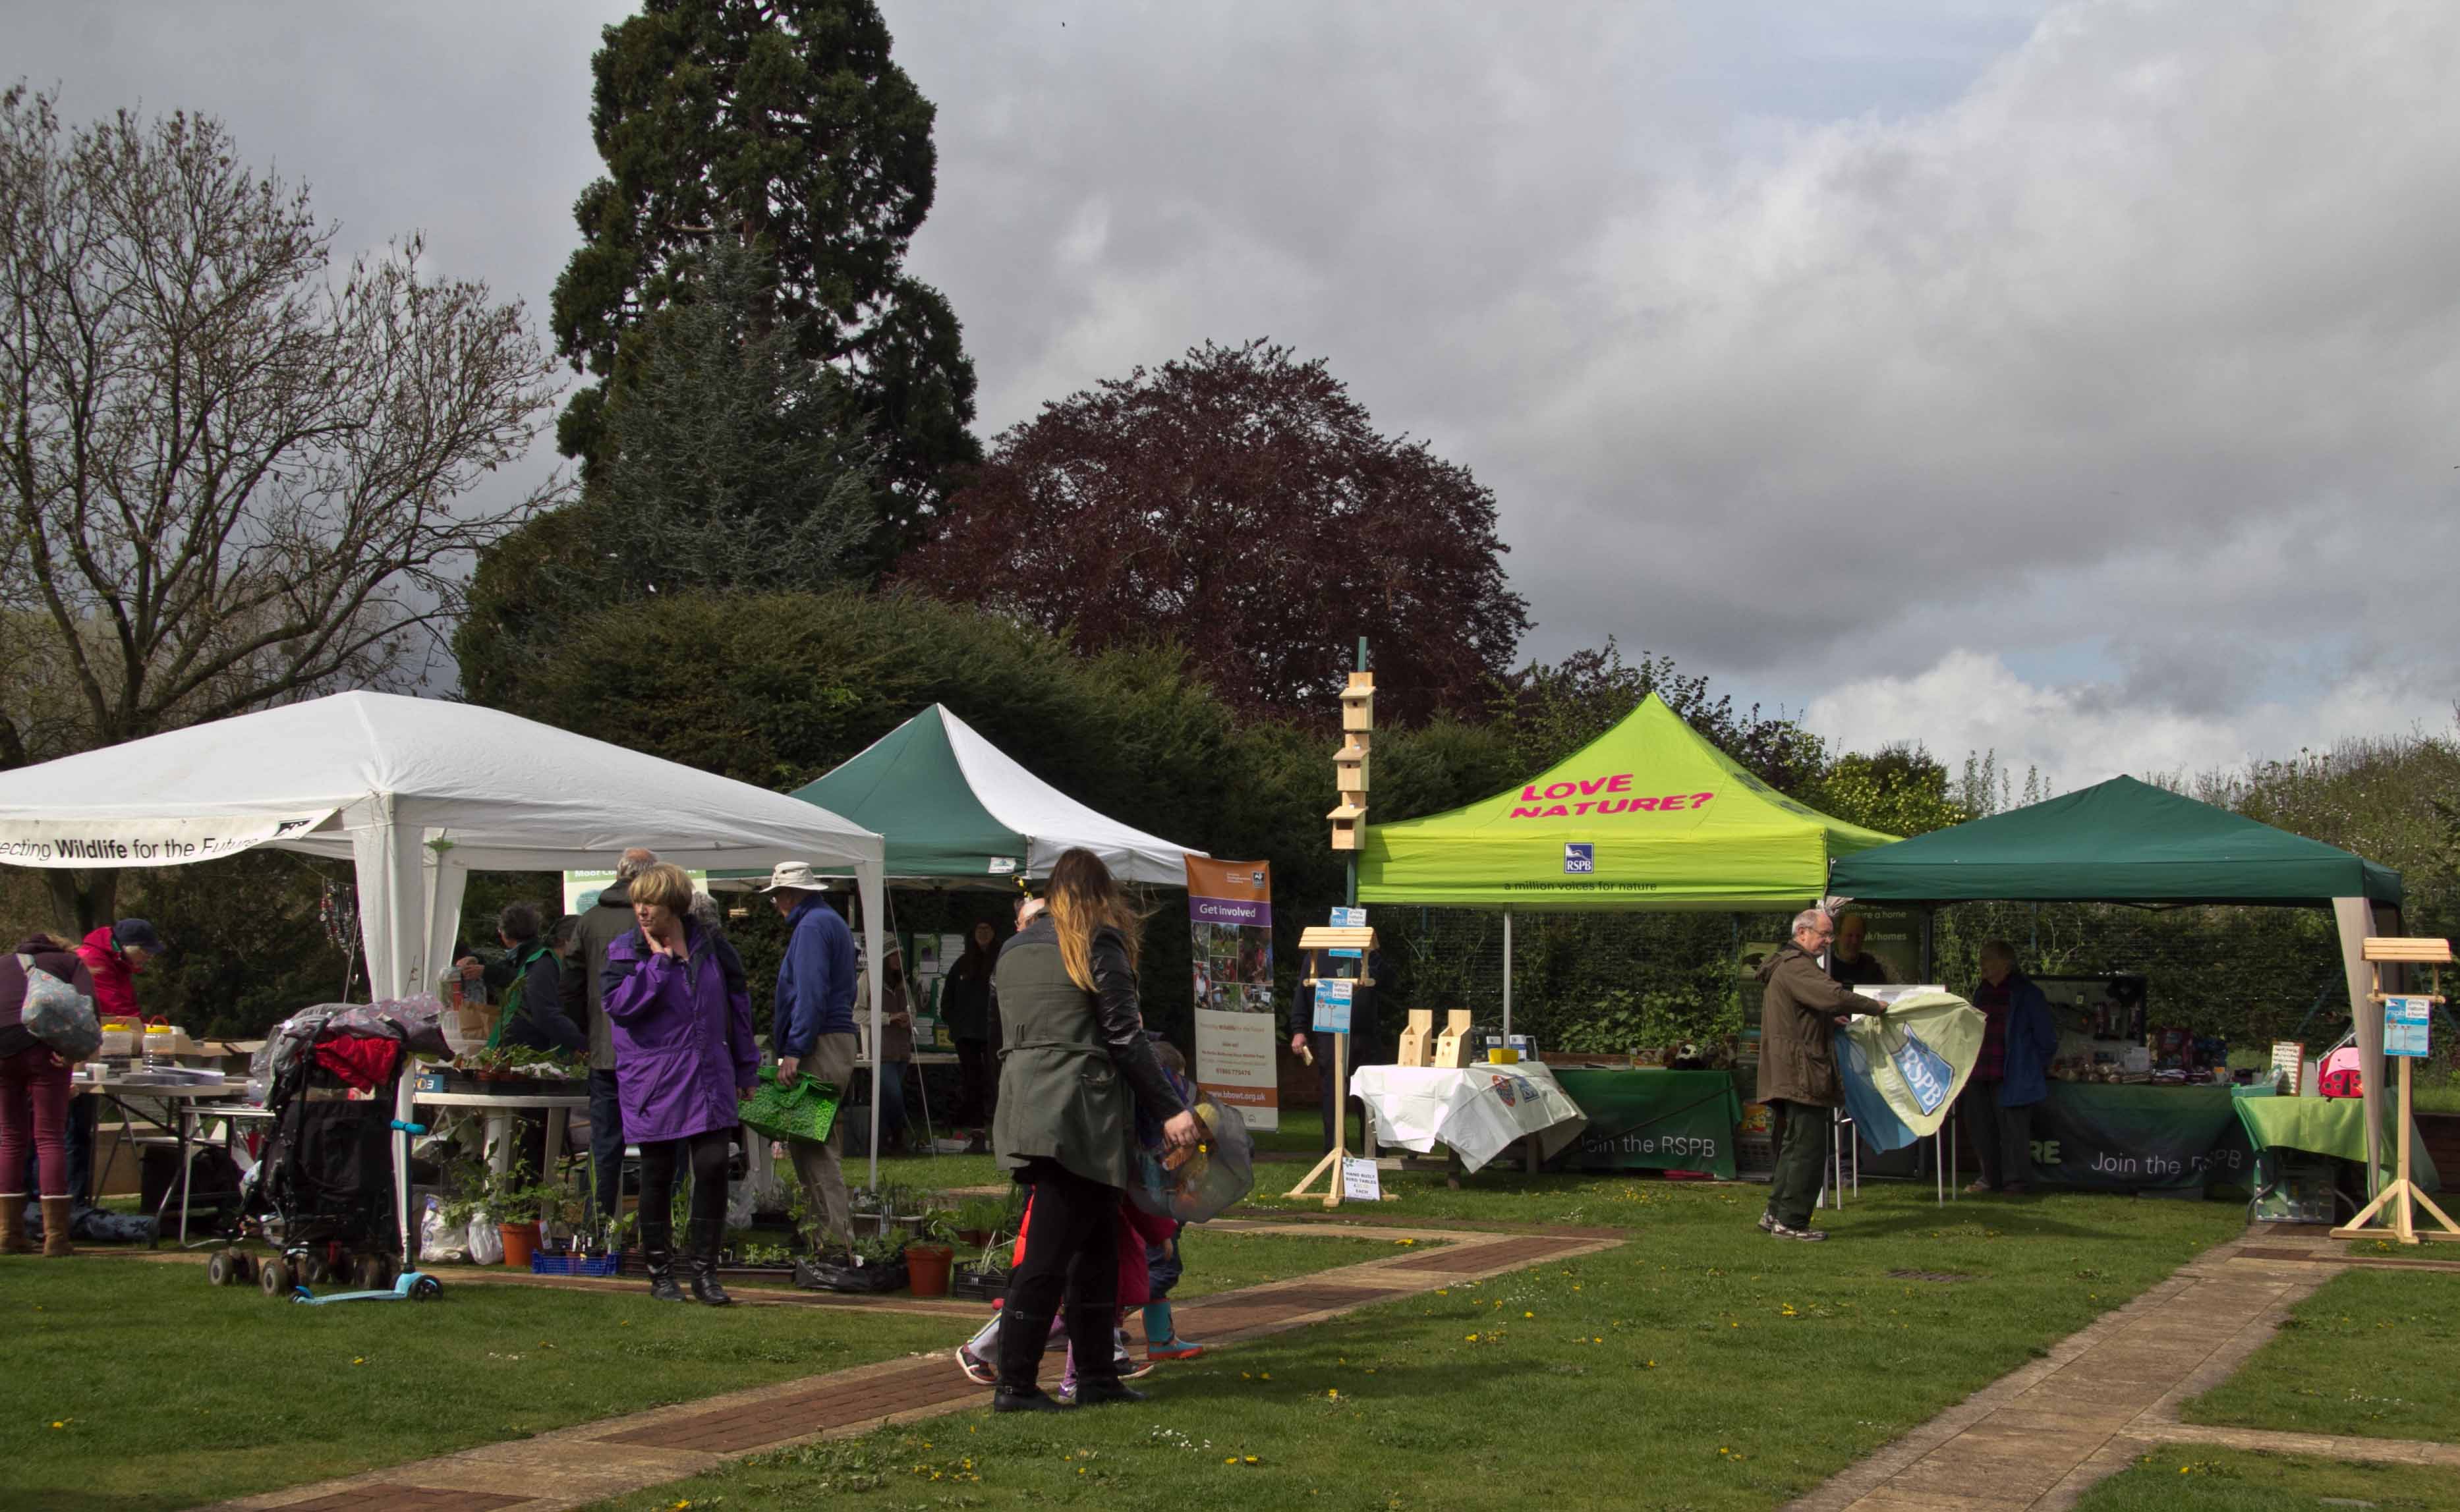 A picturesque setting for the stalls with the church in the background